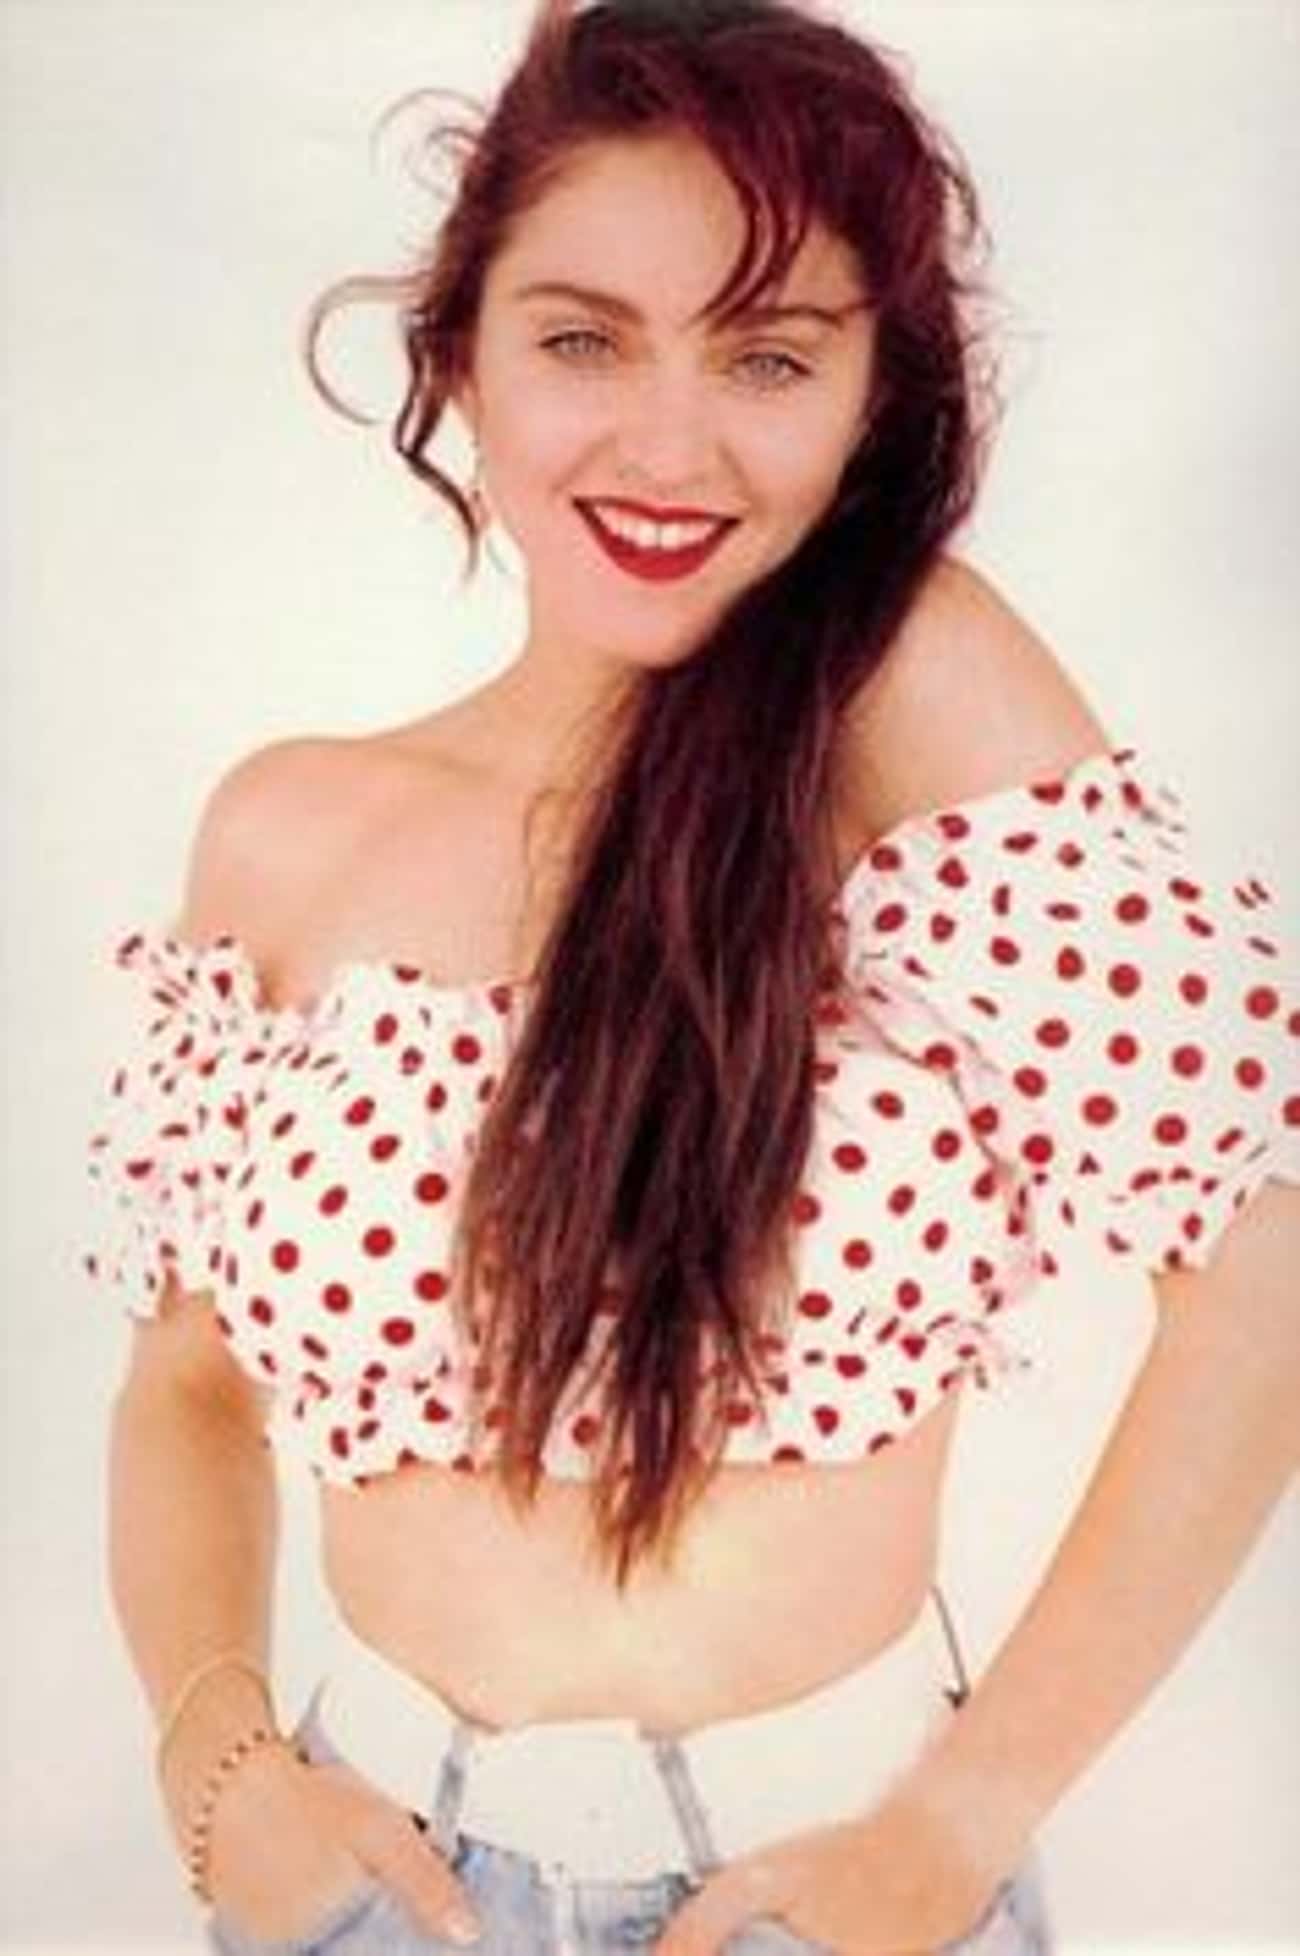 Young Madonna Loves Her Polka Dots